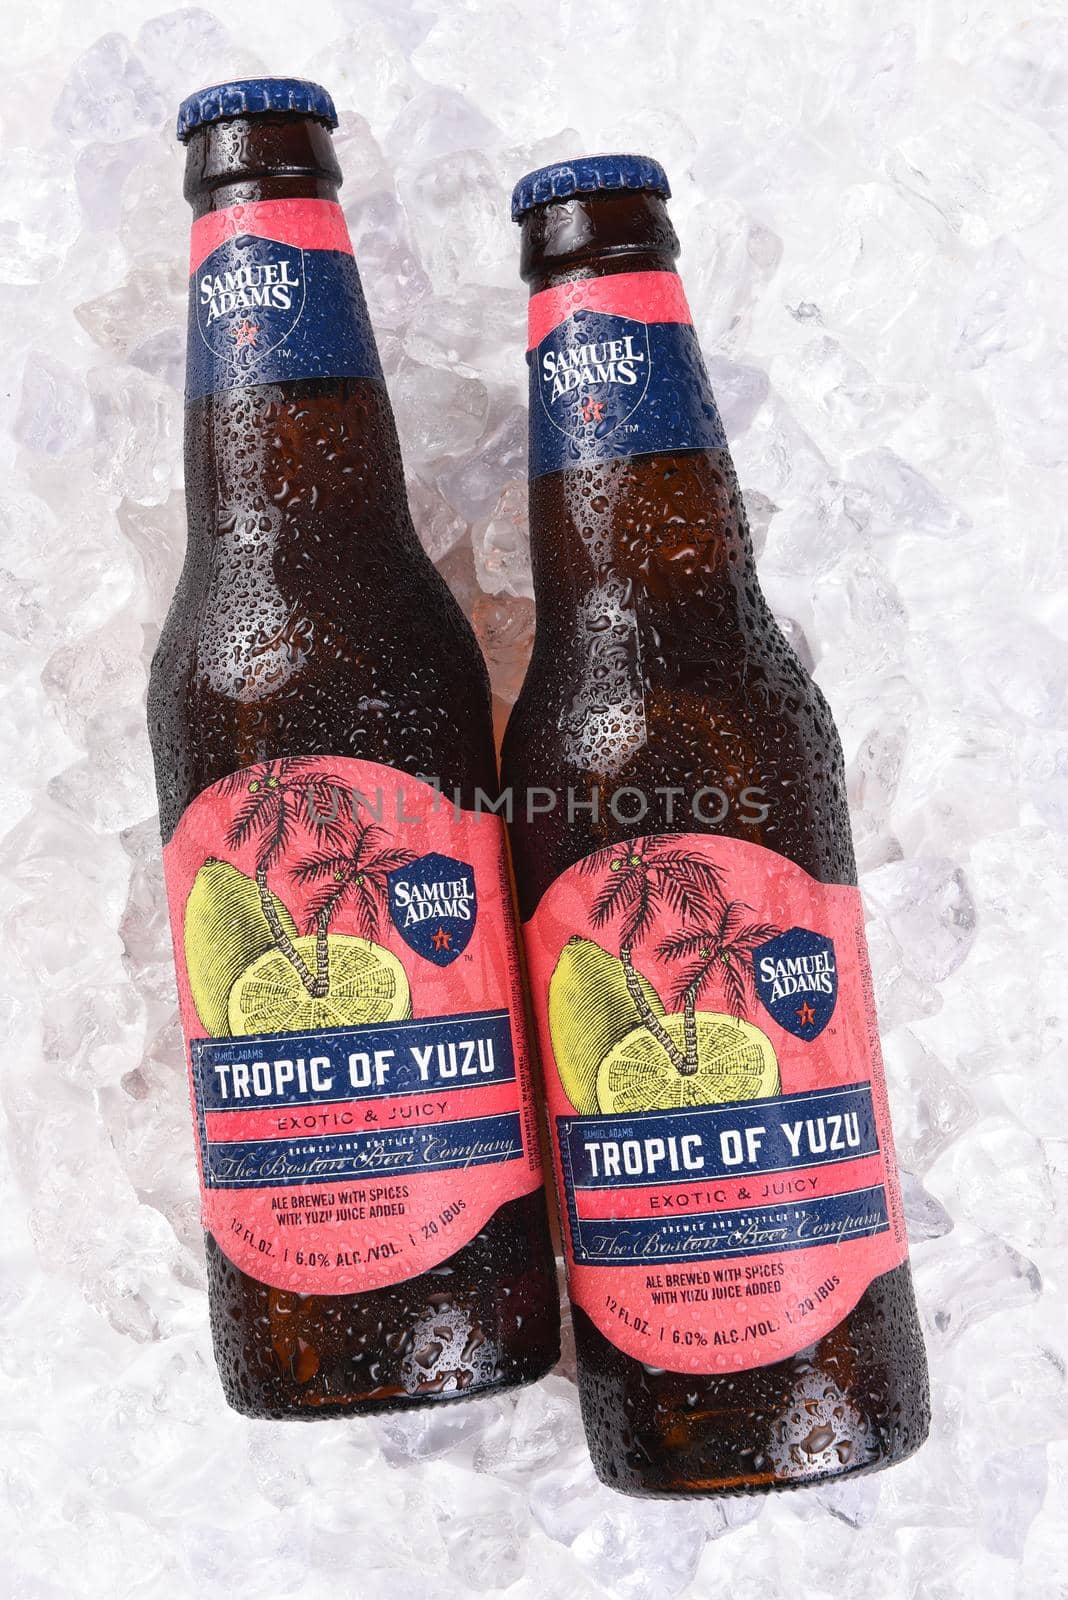 IRVINE, CA - JULY 16, 2017: Samuel Adams Tropic of Yuzu on ice. From the Boston Beer Company. Based on sales in 2016, it is the second largest craft brewery in the U.S.